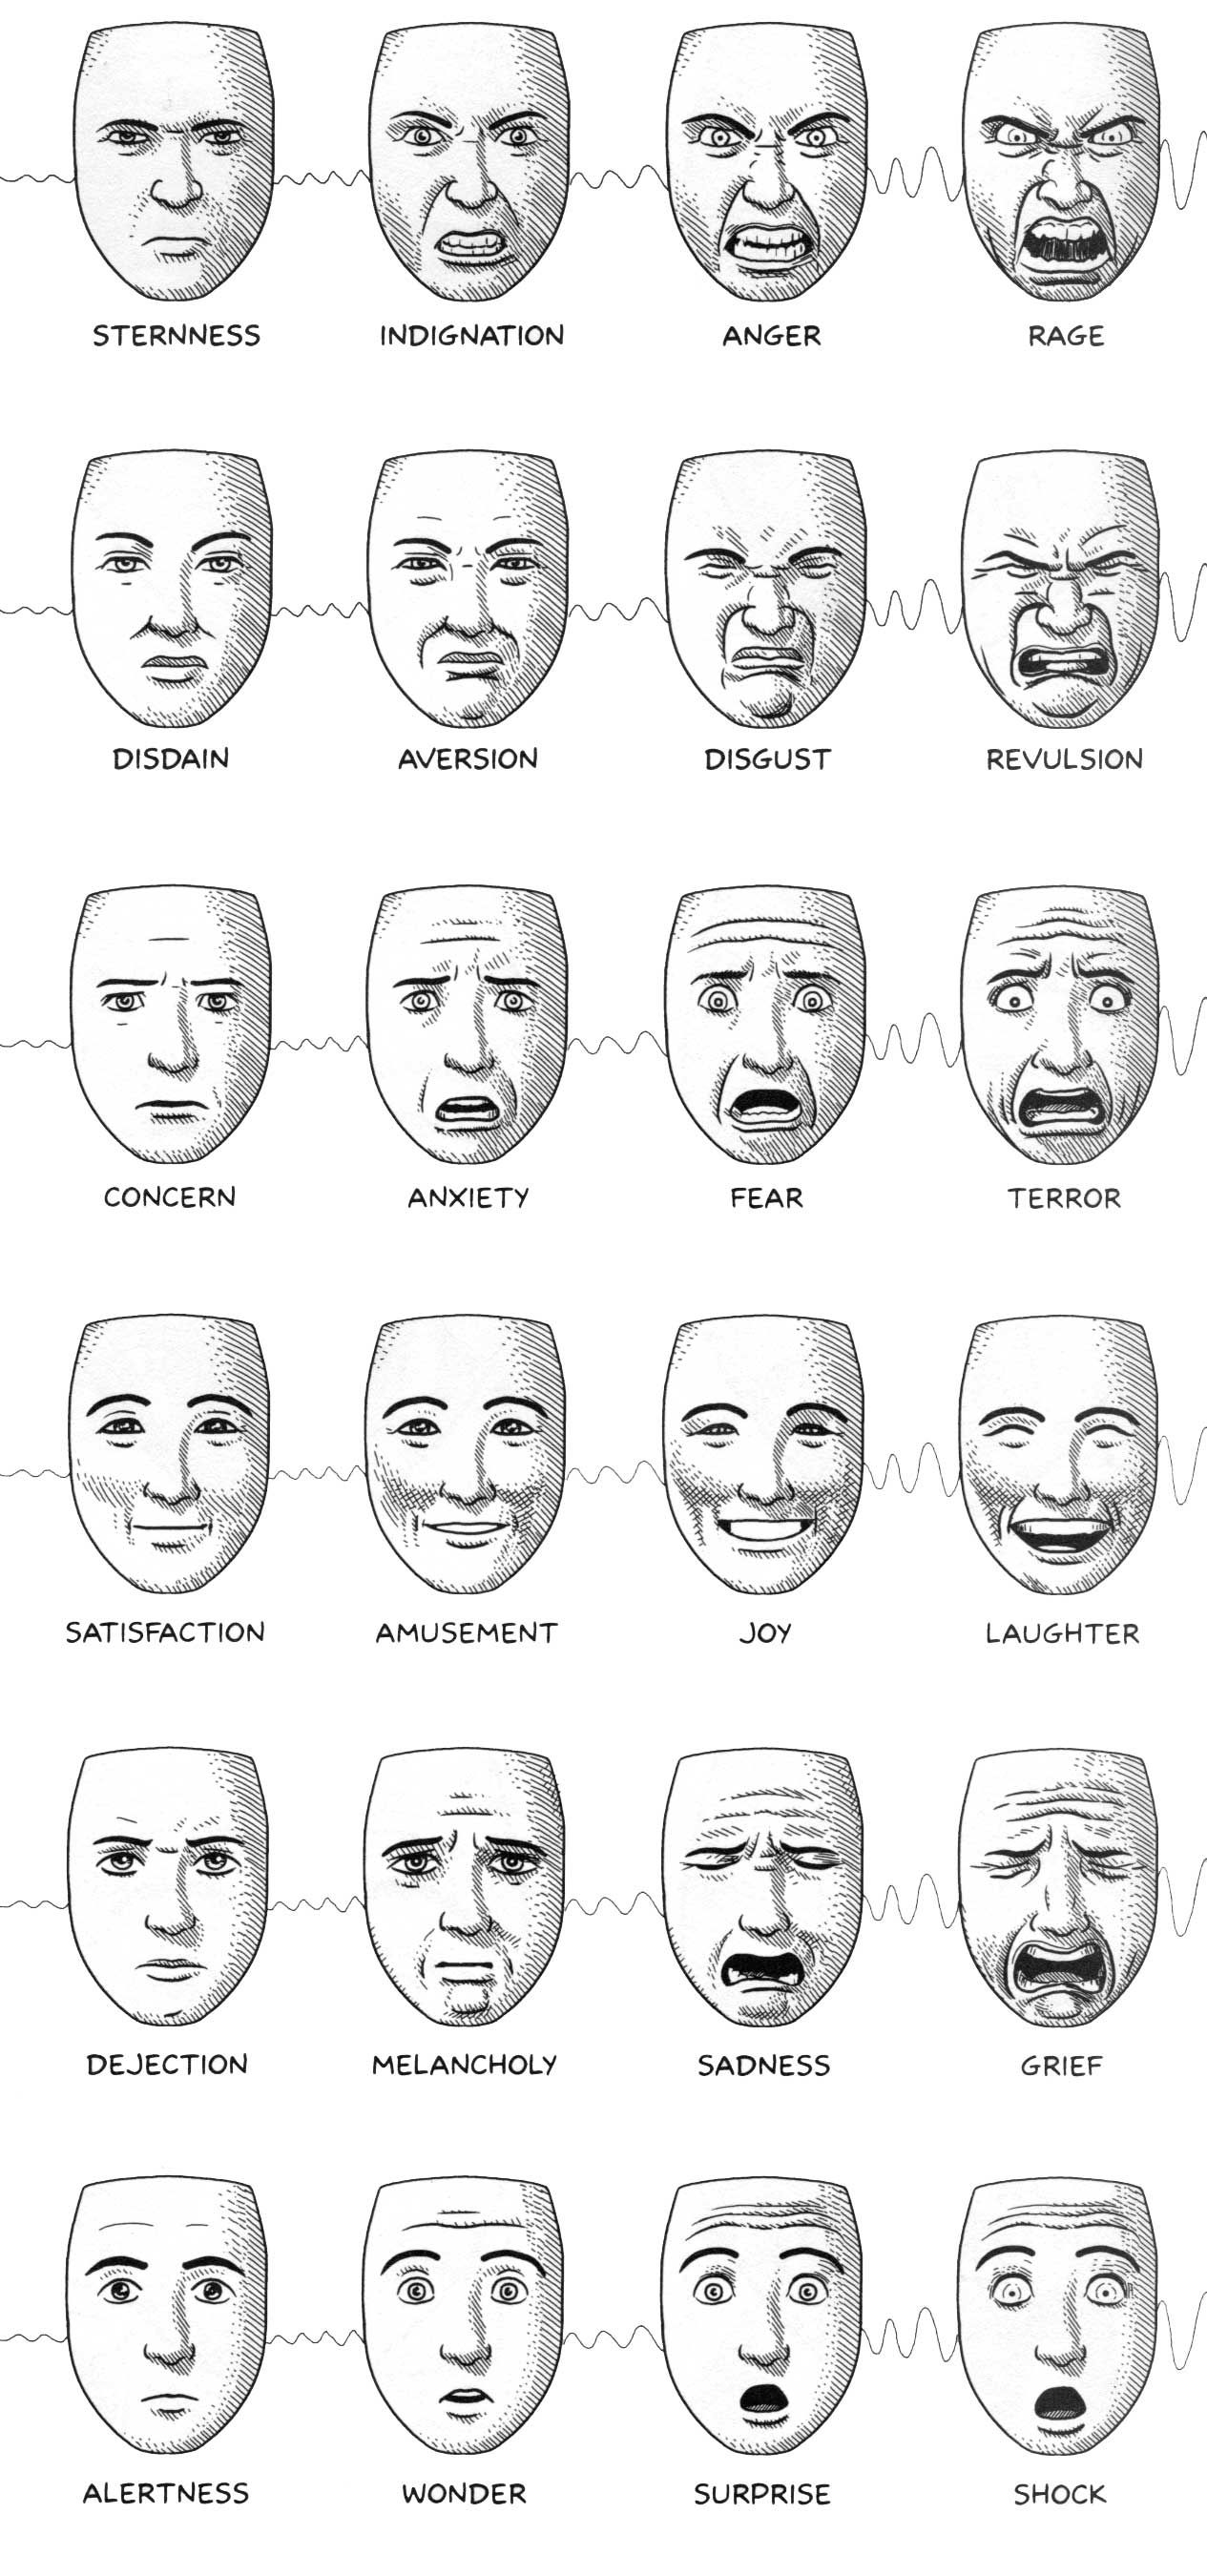 animation facial expressions chart - Google Search | Masks ...